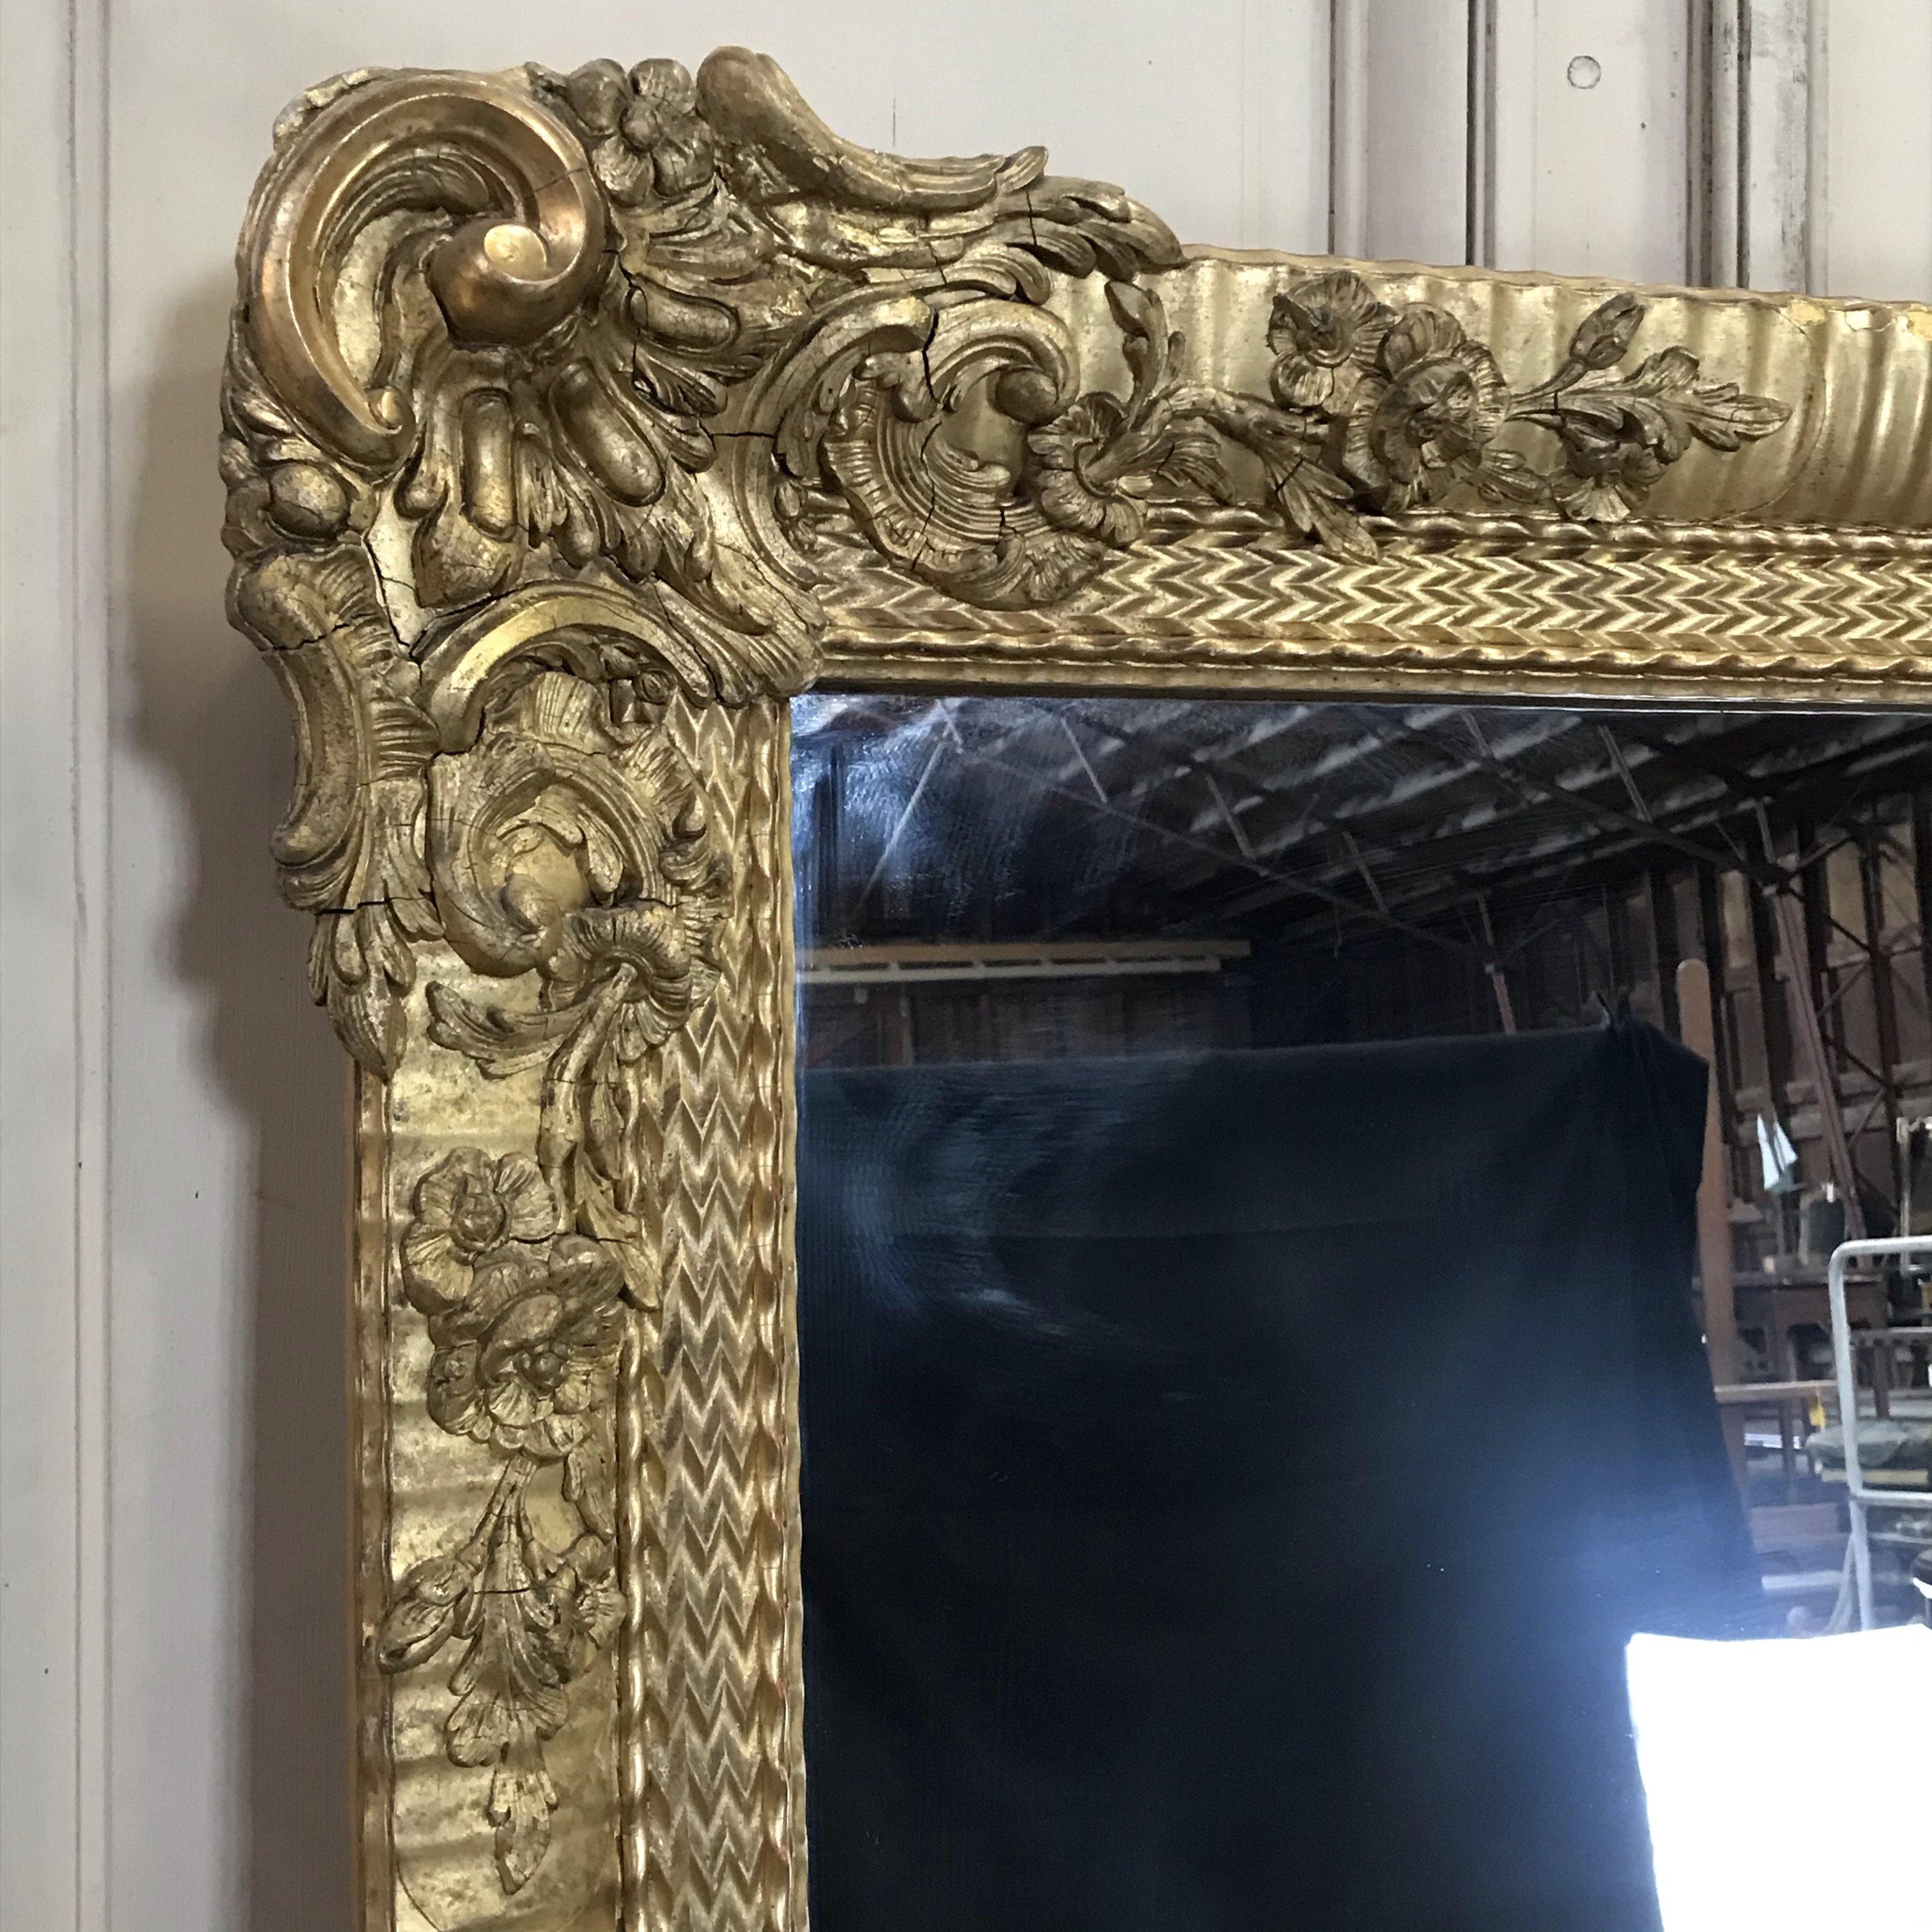 This beautiful gilded mirror in the Louis XVI style has the original mercury glass. The overall patina developed throughout the past century and a half is magnificent. Very tall and beautiful water gilding! Suitable for any room in the